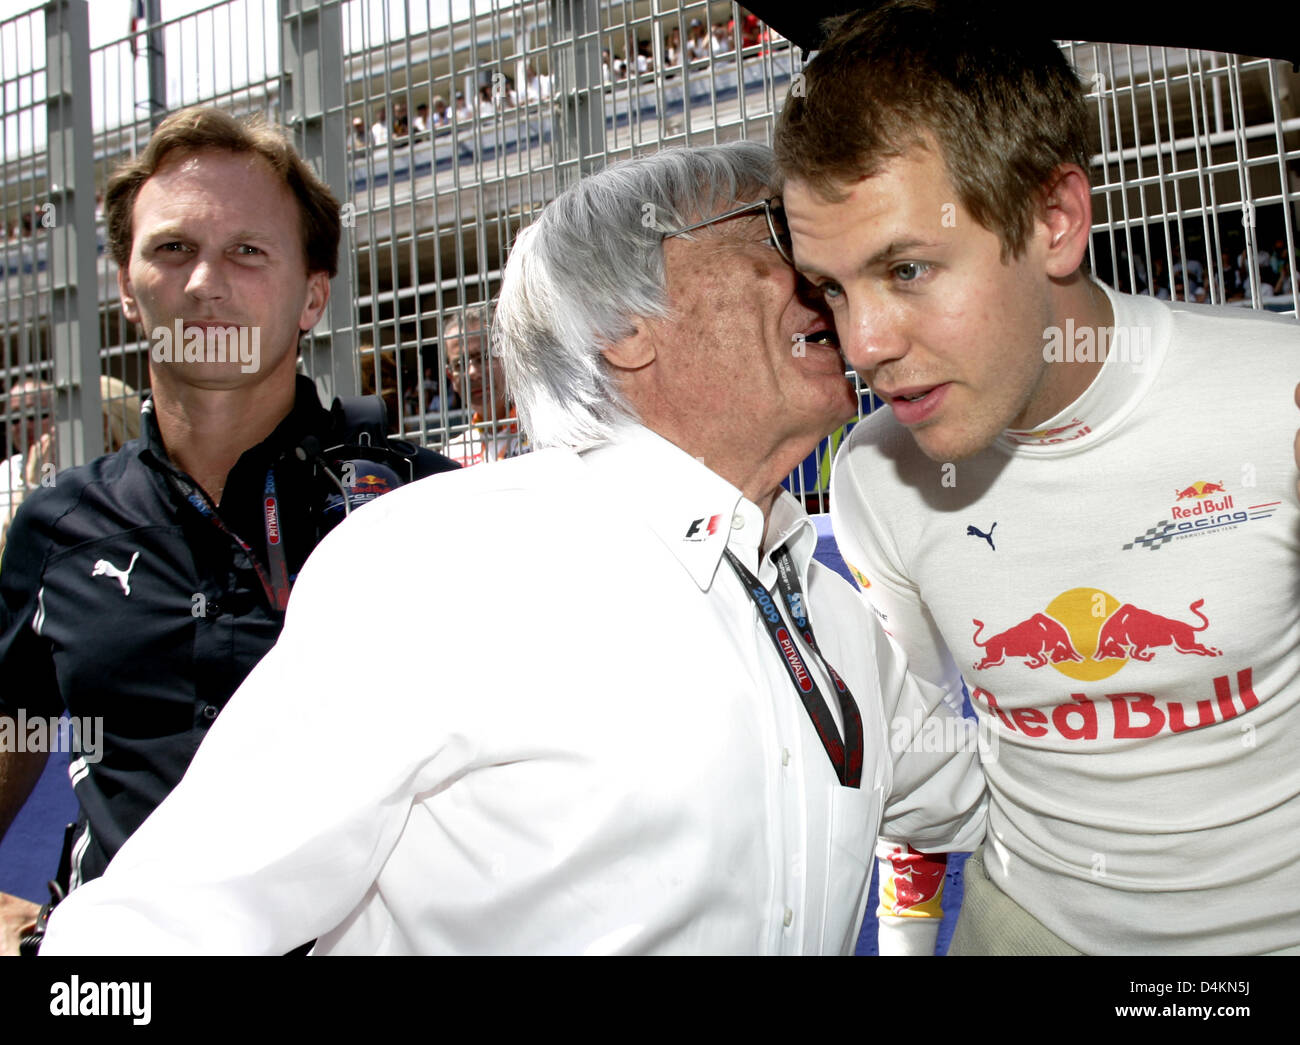 German Formula One driver Sebastian Vettel of Red Bull Racing (R), Bernie Ecclestone (C) and British Christian Horner, team principal of Red Bull Racing (L), are pictured in the grid prior to the start of the Formula One Grand Prix of Spain at Circuit de Catalunya in Montmelo near Barcelona, Spain, 10 May 2009. Photo: Felix Heyder Stock Photo